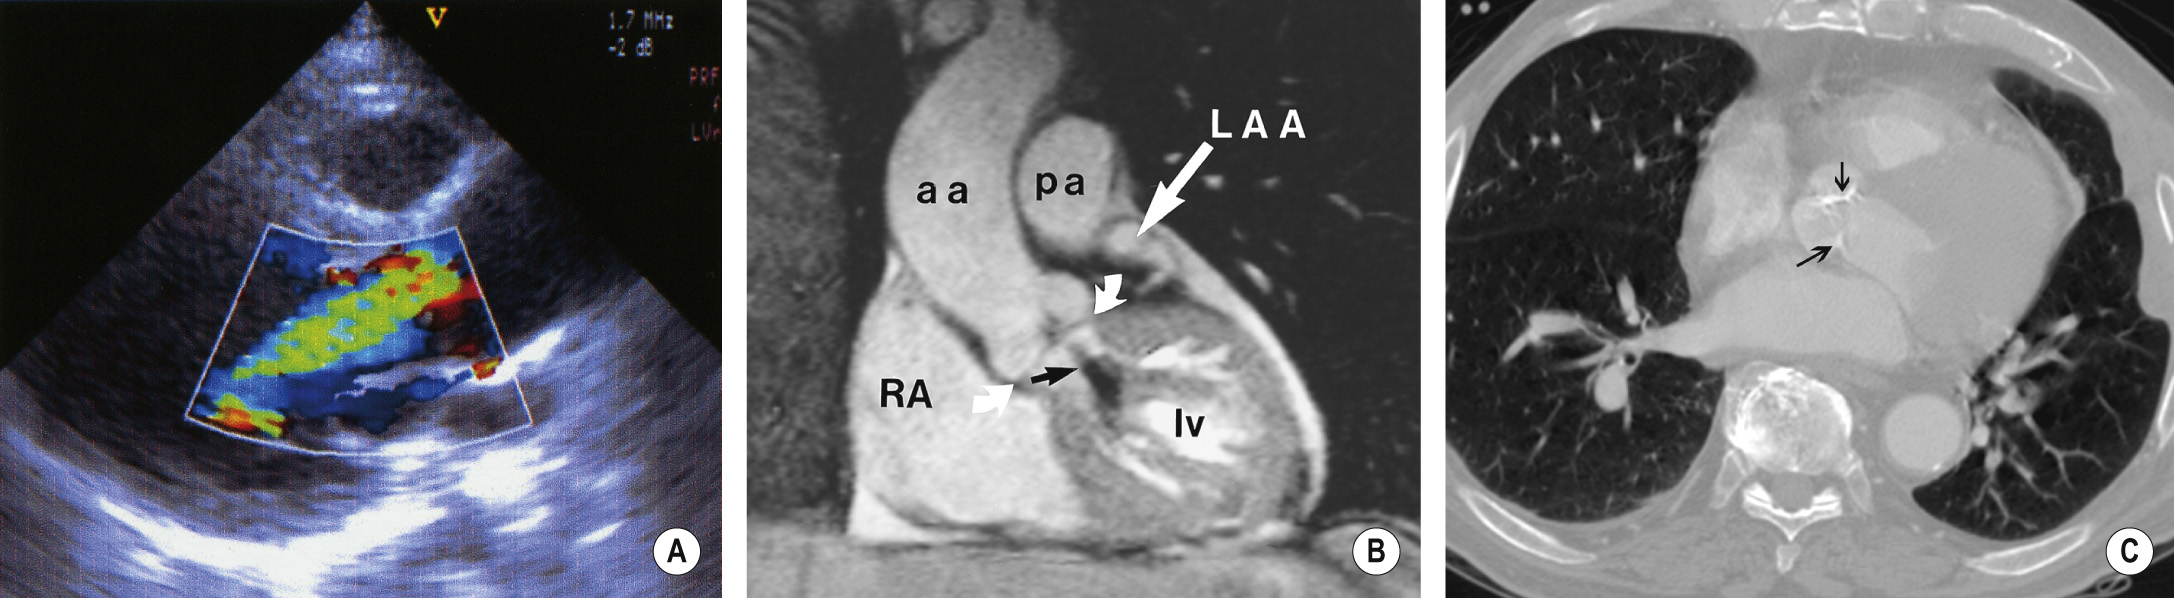 (A) Colour flow Doppler image taken in the parasternal long-axis view. A broad-based jet in a patient with severe aortic regurgitation. (B) Coronal MRA. Oblique breath-hold cine-MRA in a patient with mild aortic regurgitation indicated by the black area of signal loss (black arrow). The left atrial appendage (LAA) is embedded in epicardial fat. There is mild dilatation of the ascending aorta (aa) as a result of the aortic regurgitation. Between curved arrows = aortic valve. lv = left ventricle, pa = pulmonary artery, RA = right atrium. (C) Aortic valve calcification. Axial CT at aortic valve level shows calcification of the aortic leaflets (arrows).